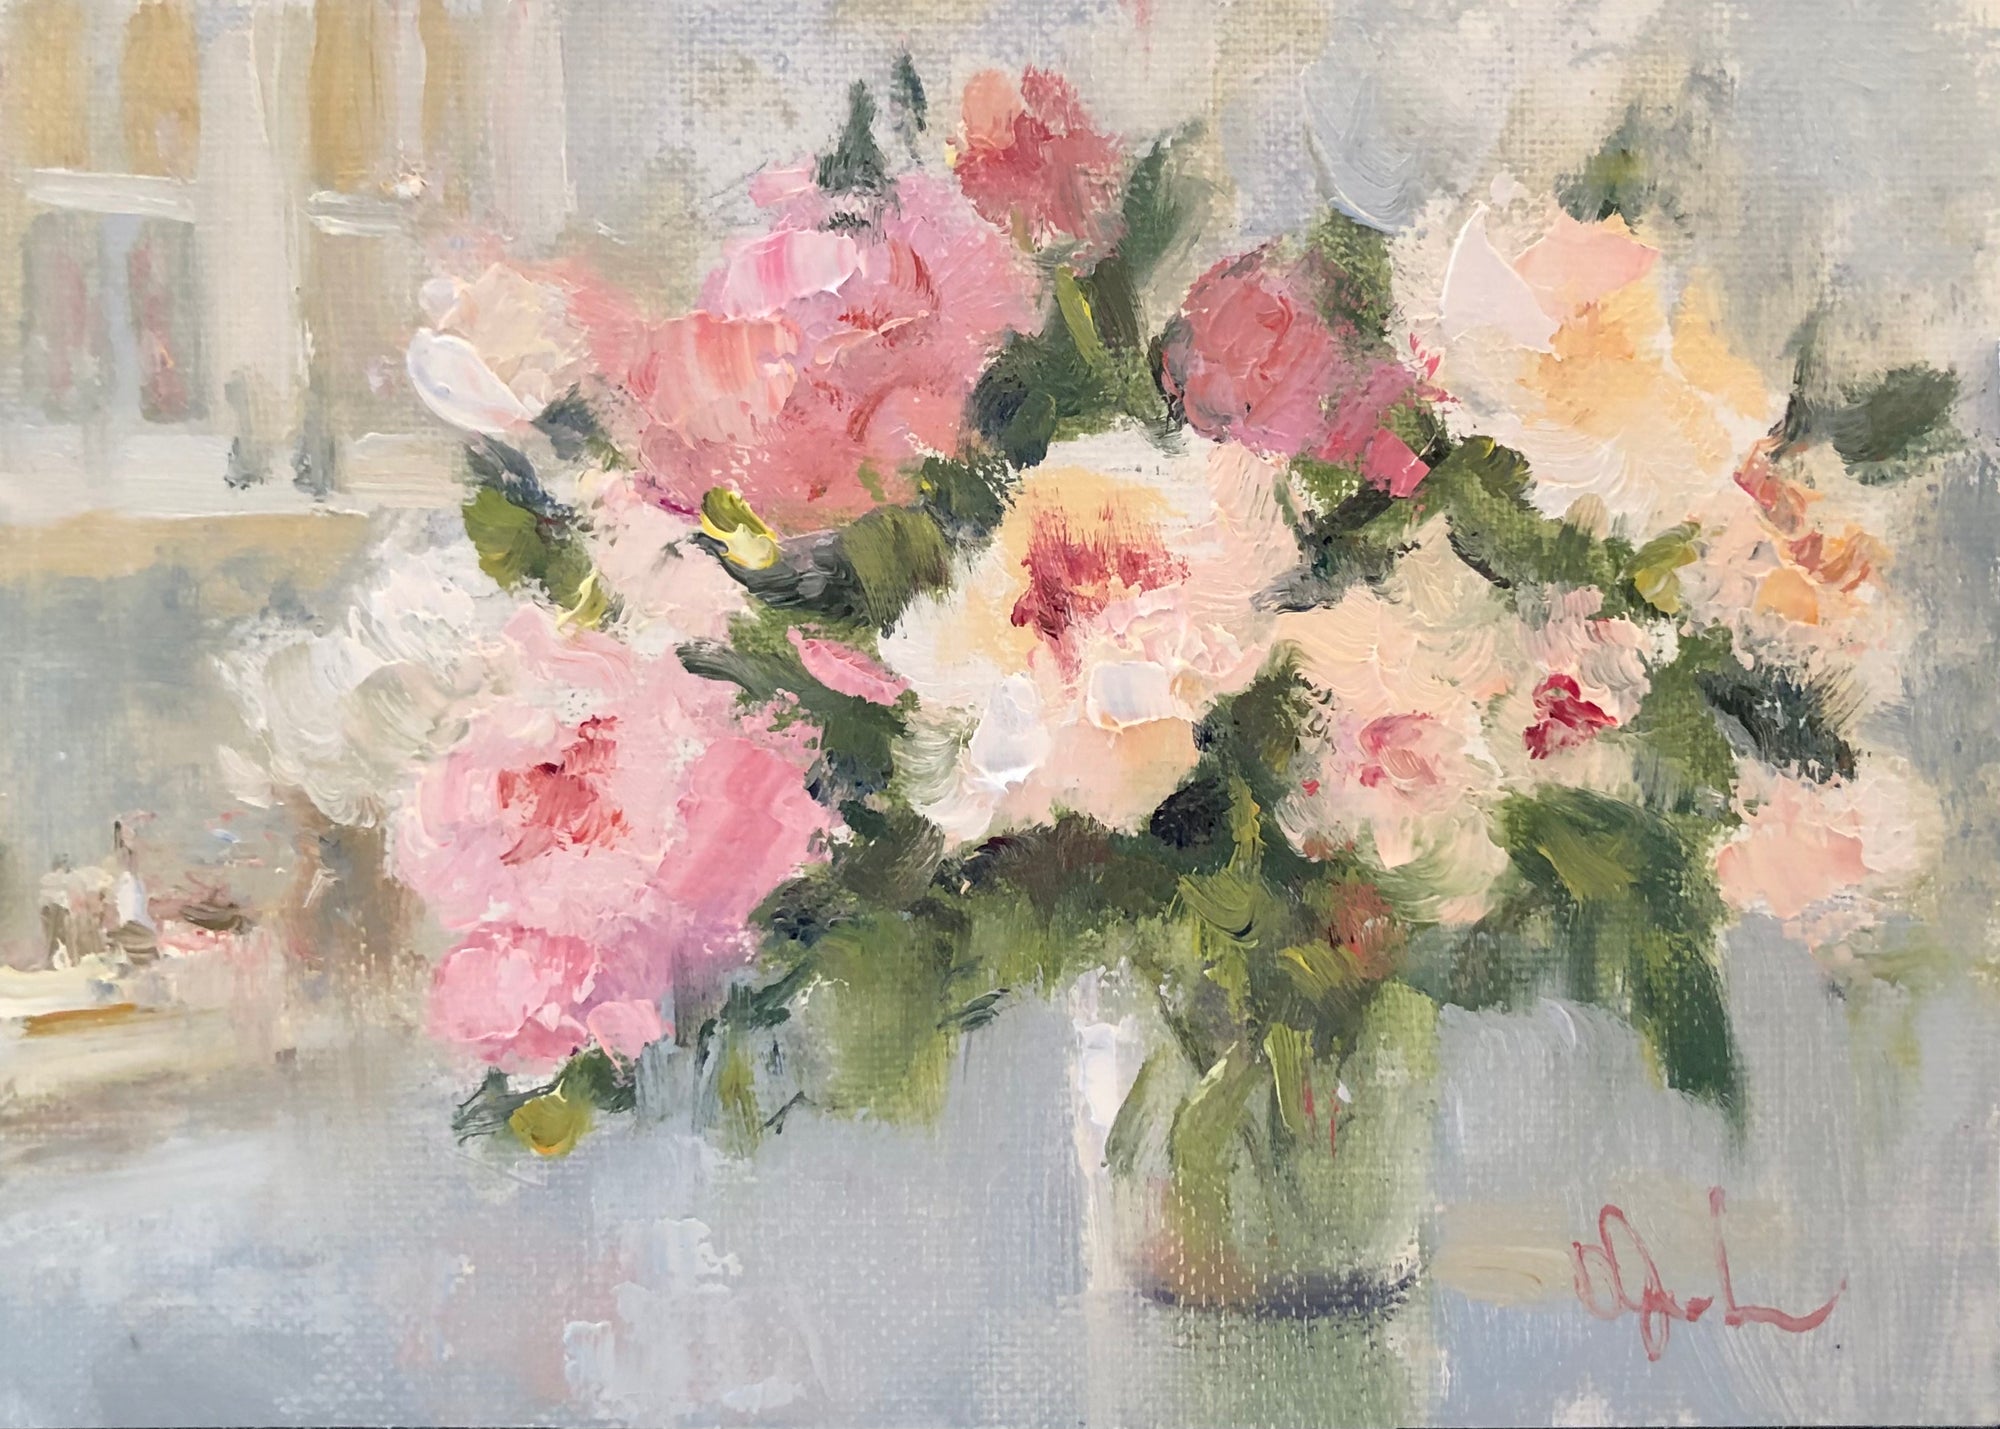 Morning Bouquet - SOLD